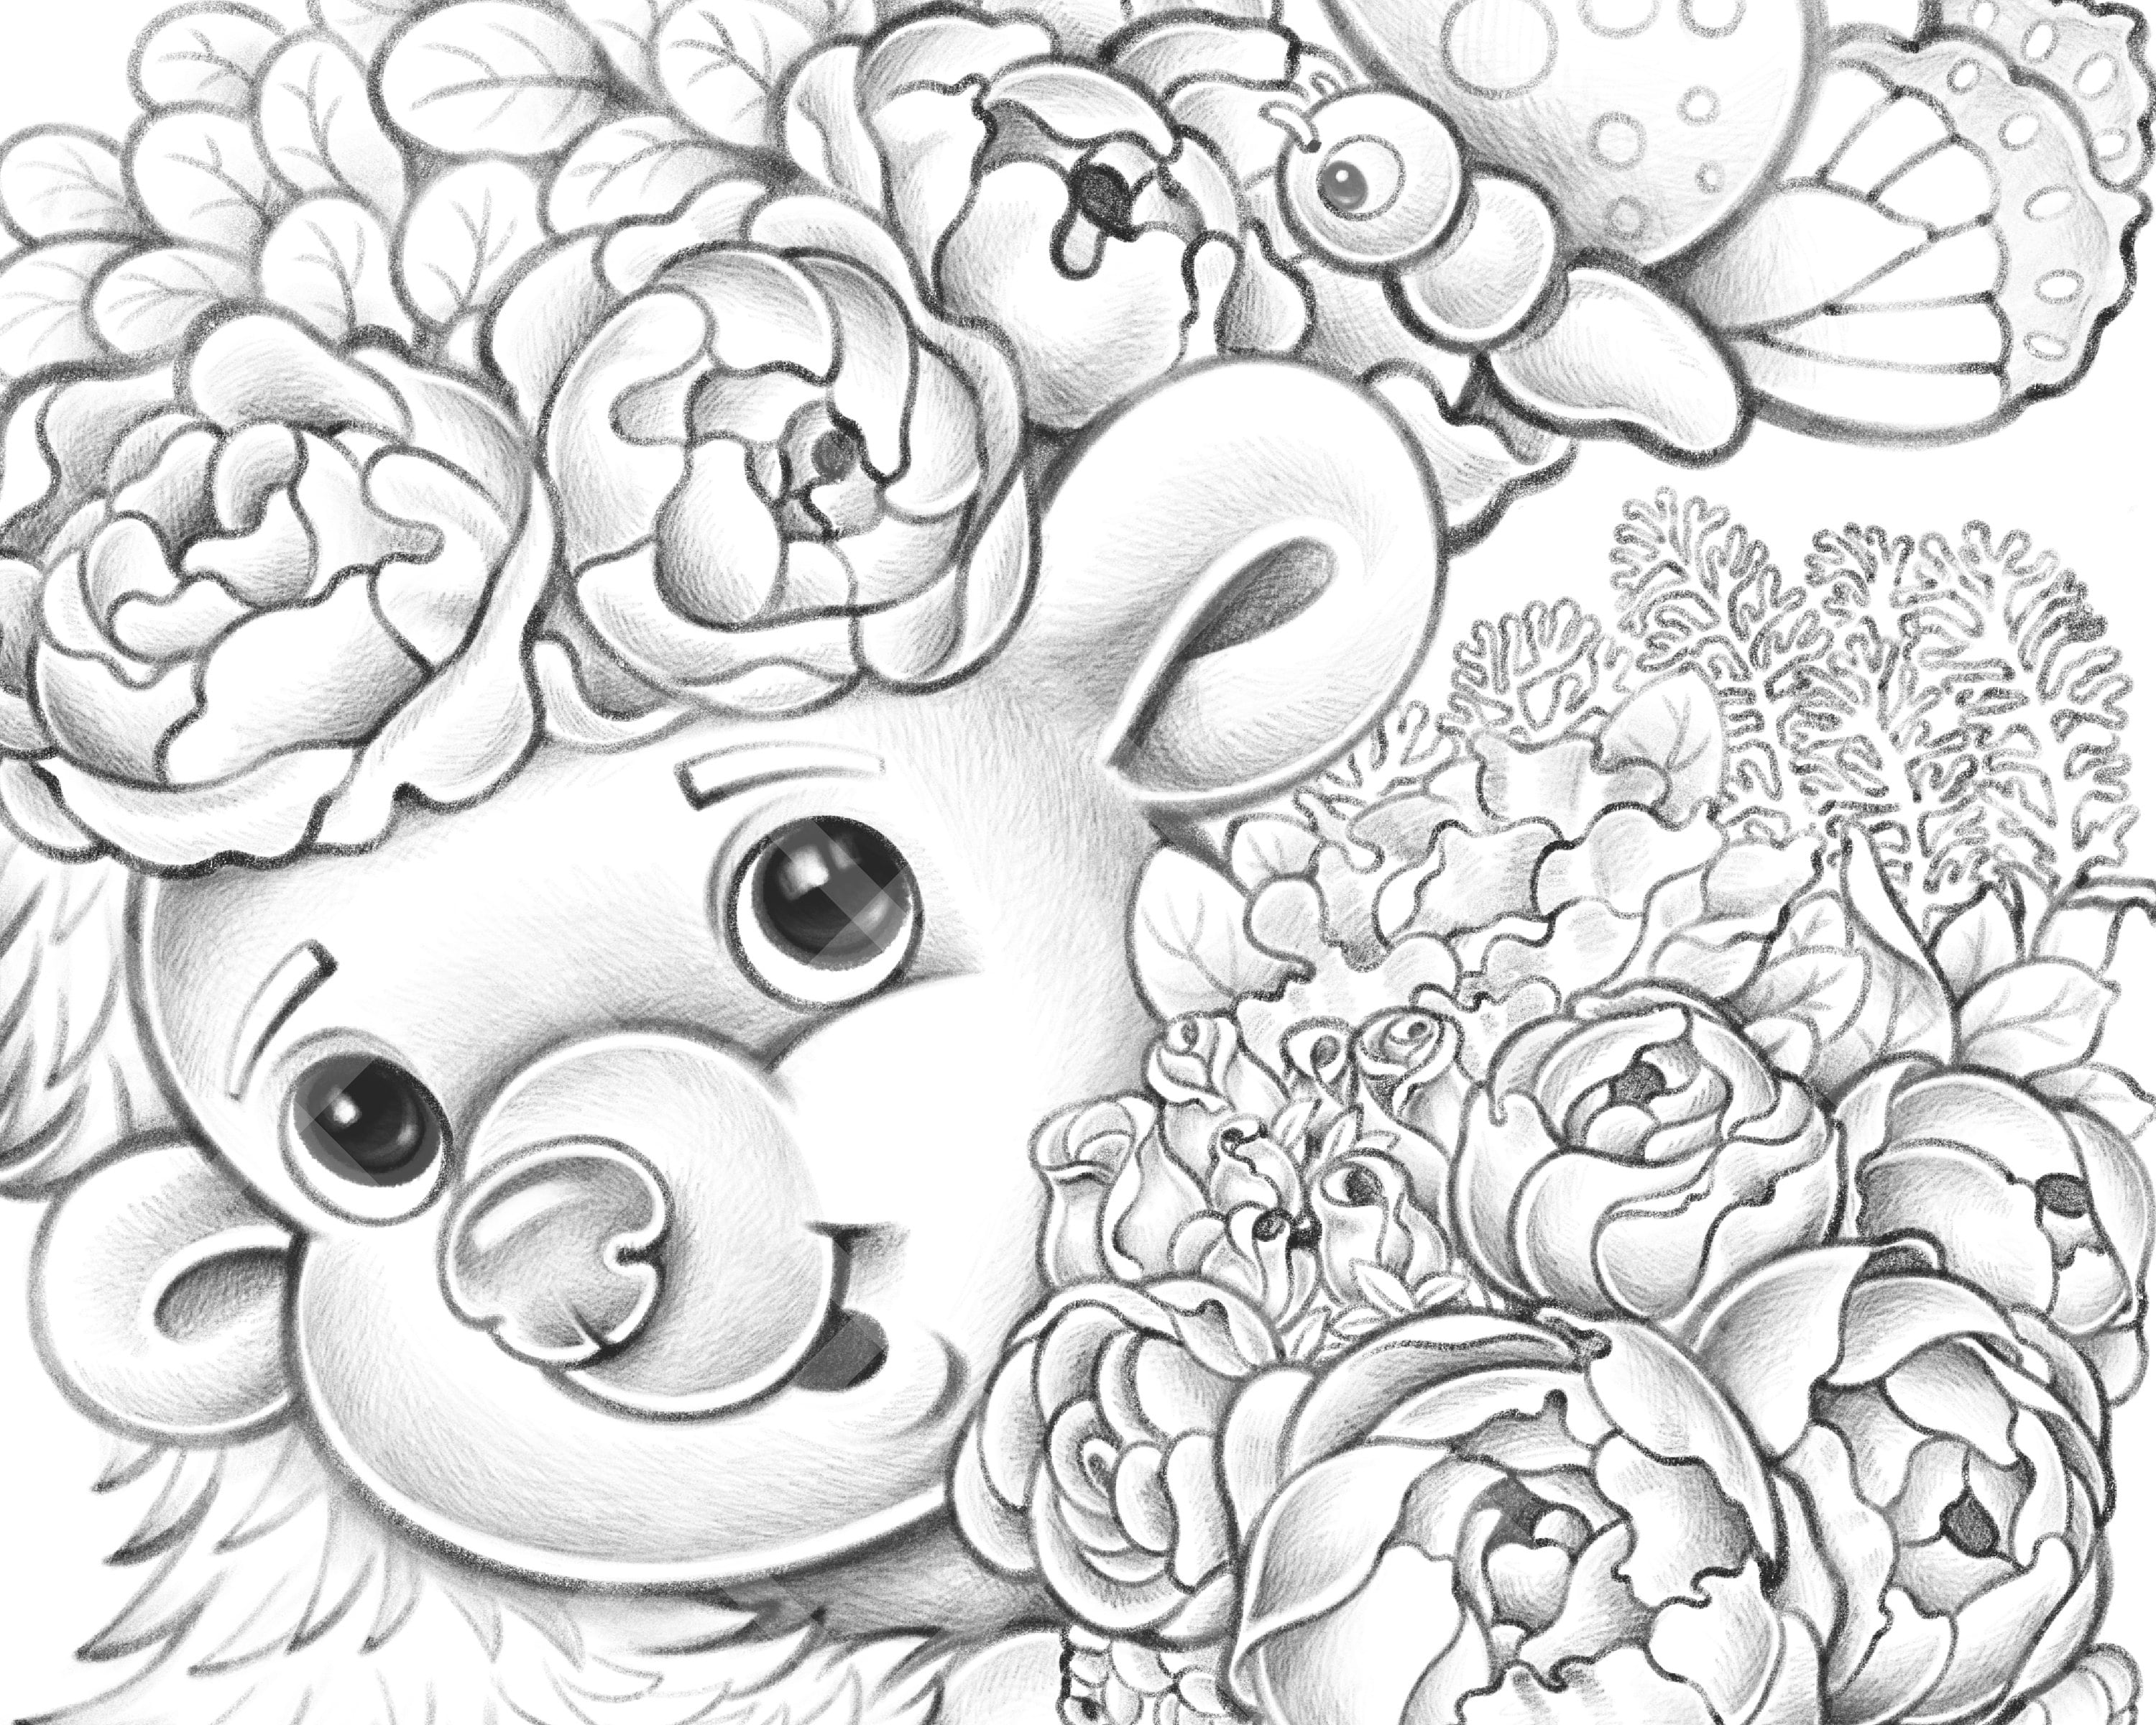 Flower basket grayscale coloring page printable cute coloring book page animal hedgehog butterfly peonies bouquet pdf instant download